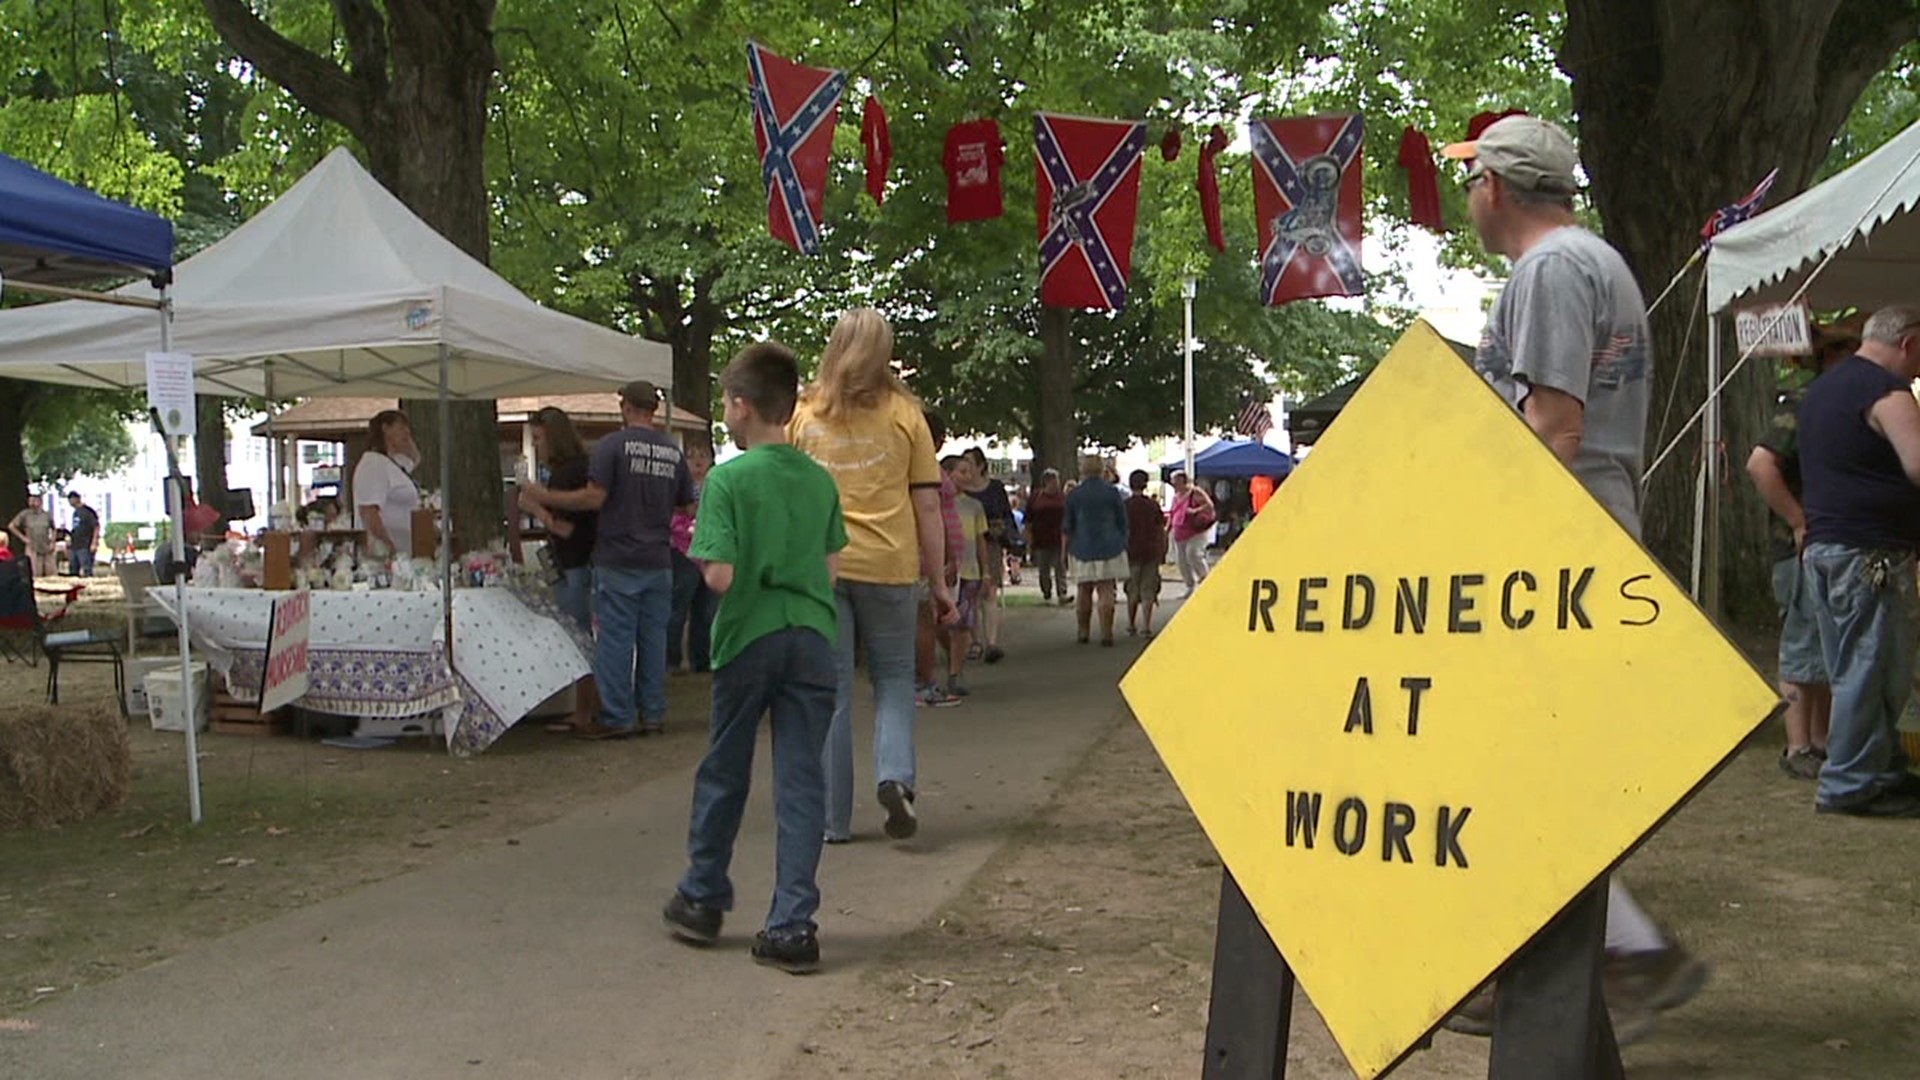 From coronavirus to Confederate flags, an annual summer festival is drawing quite a bit of scrutiny this year.